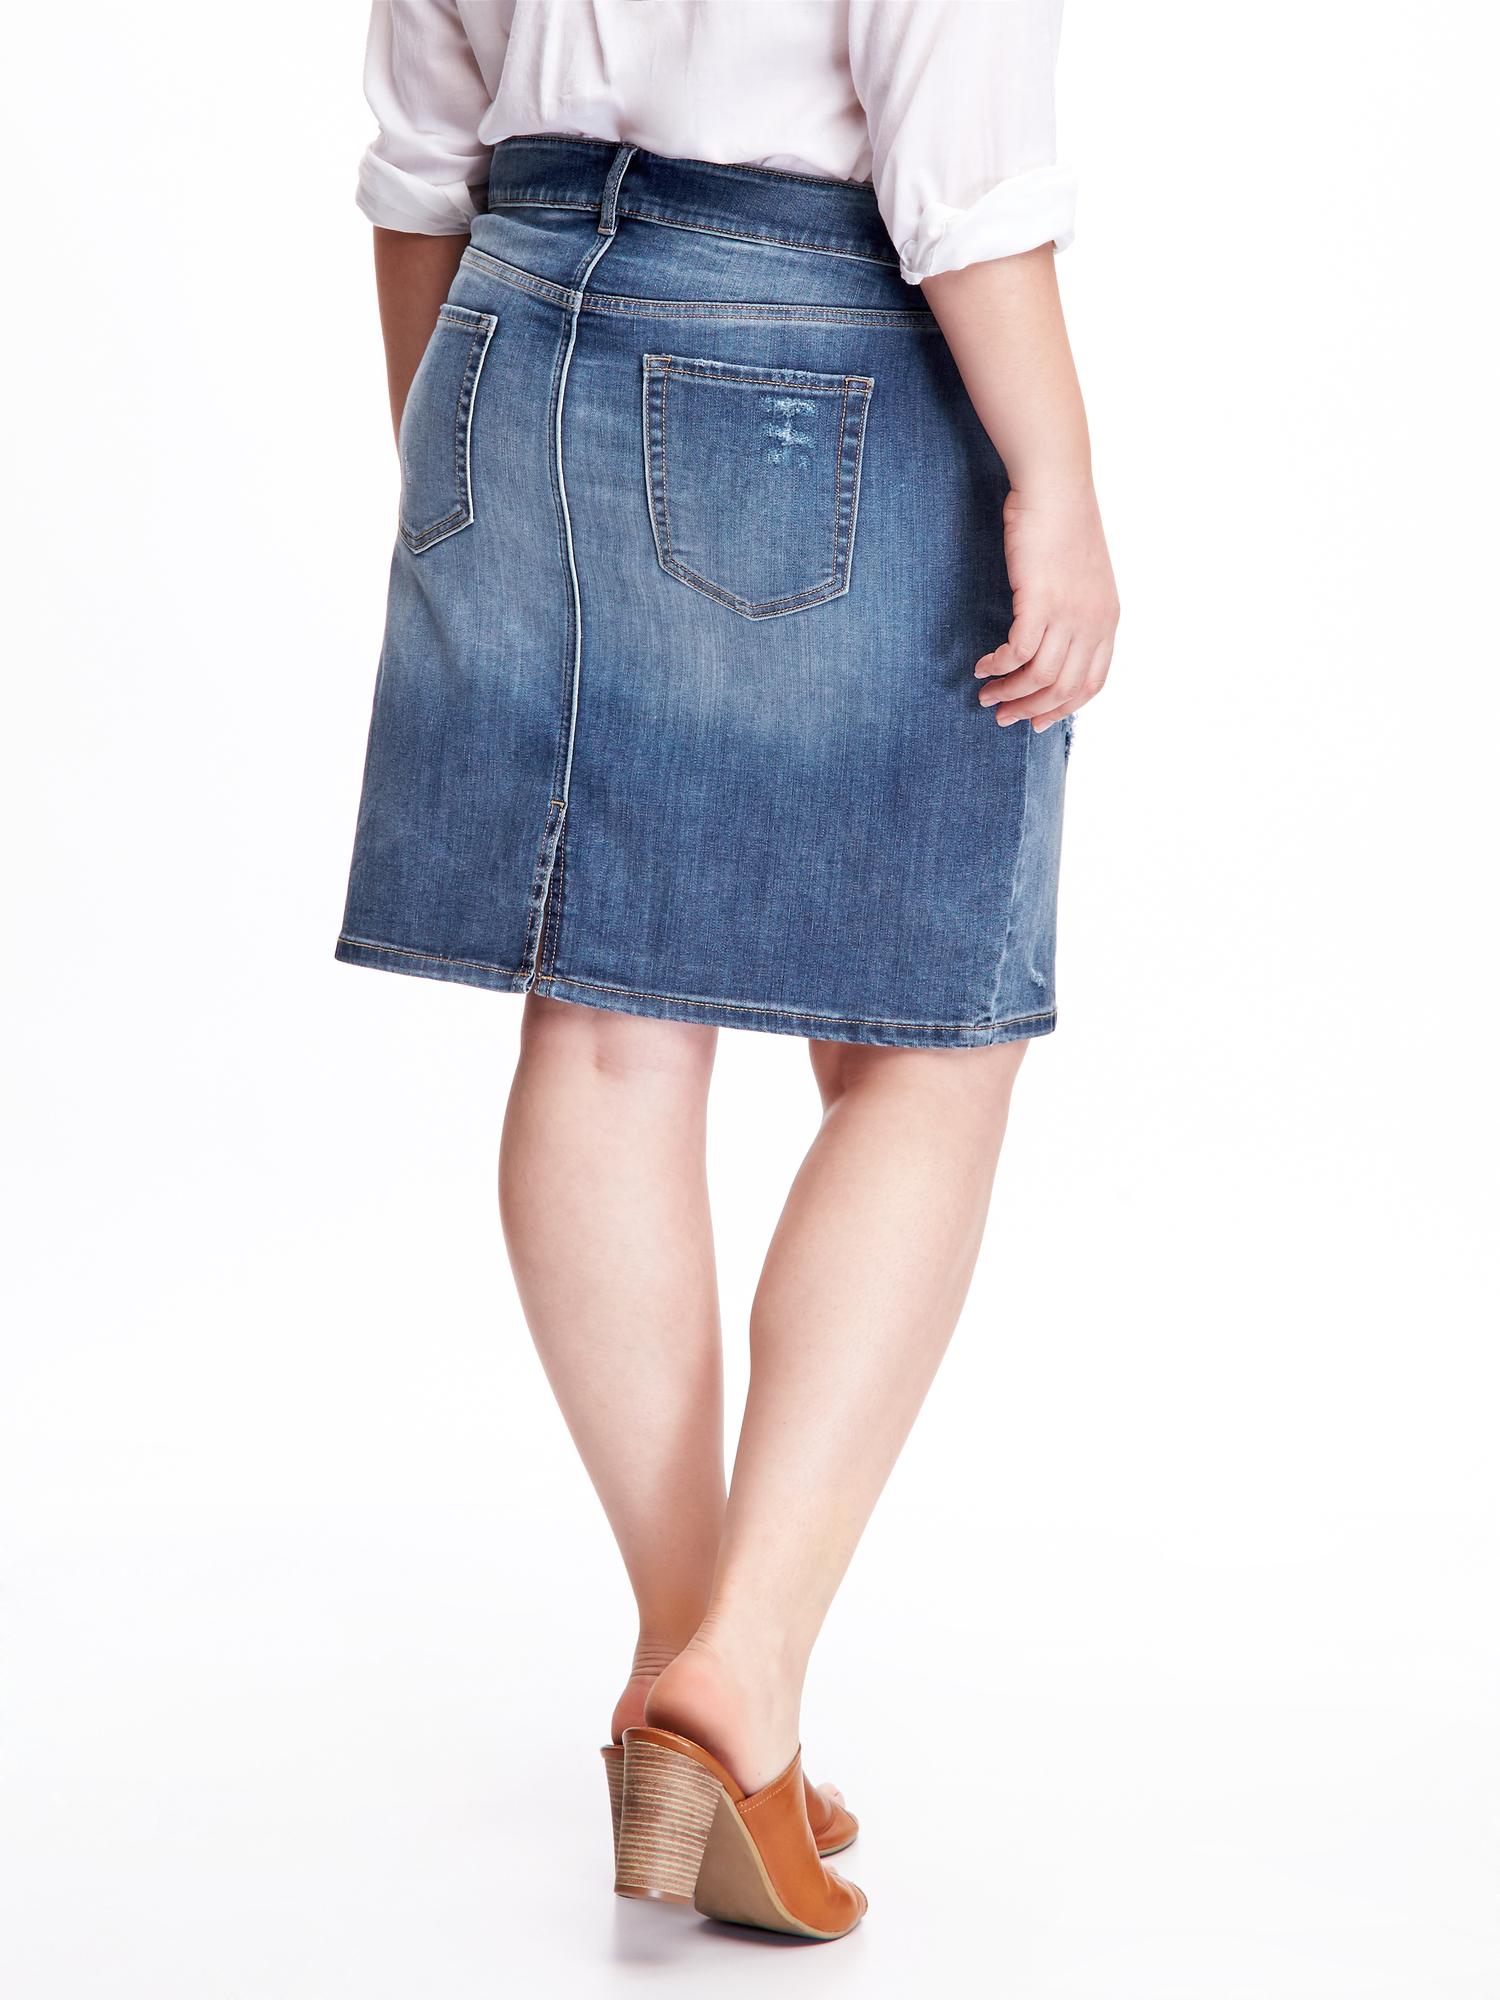 BEST in sales SKIES ARE BLUE Clothing Plus Size - Button Denim Midi Skirt;  made by Skies Are Blue online shop